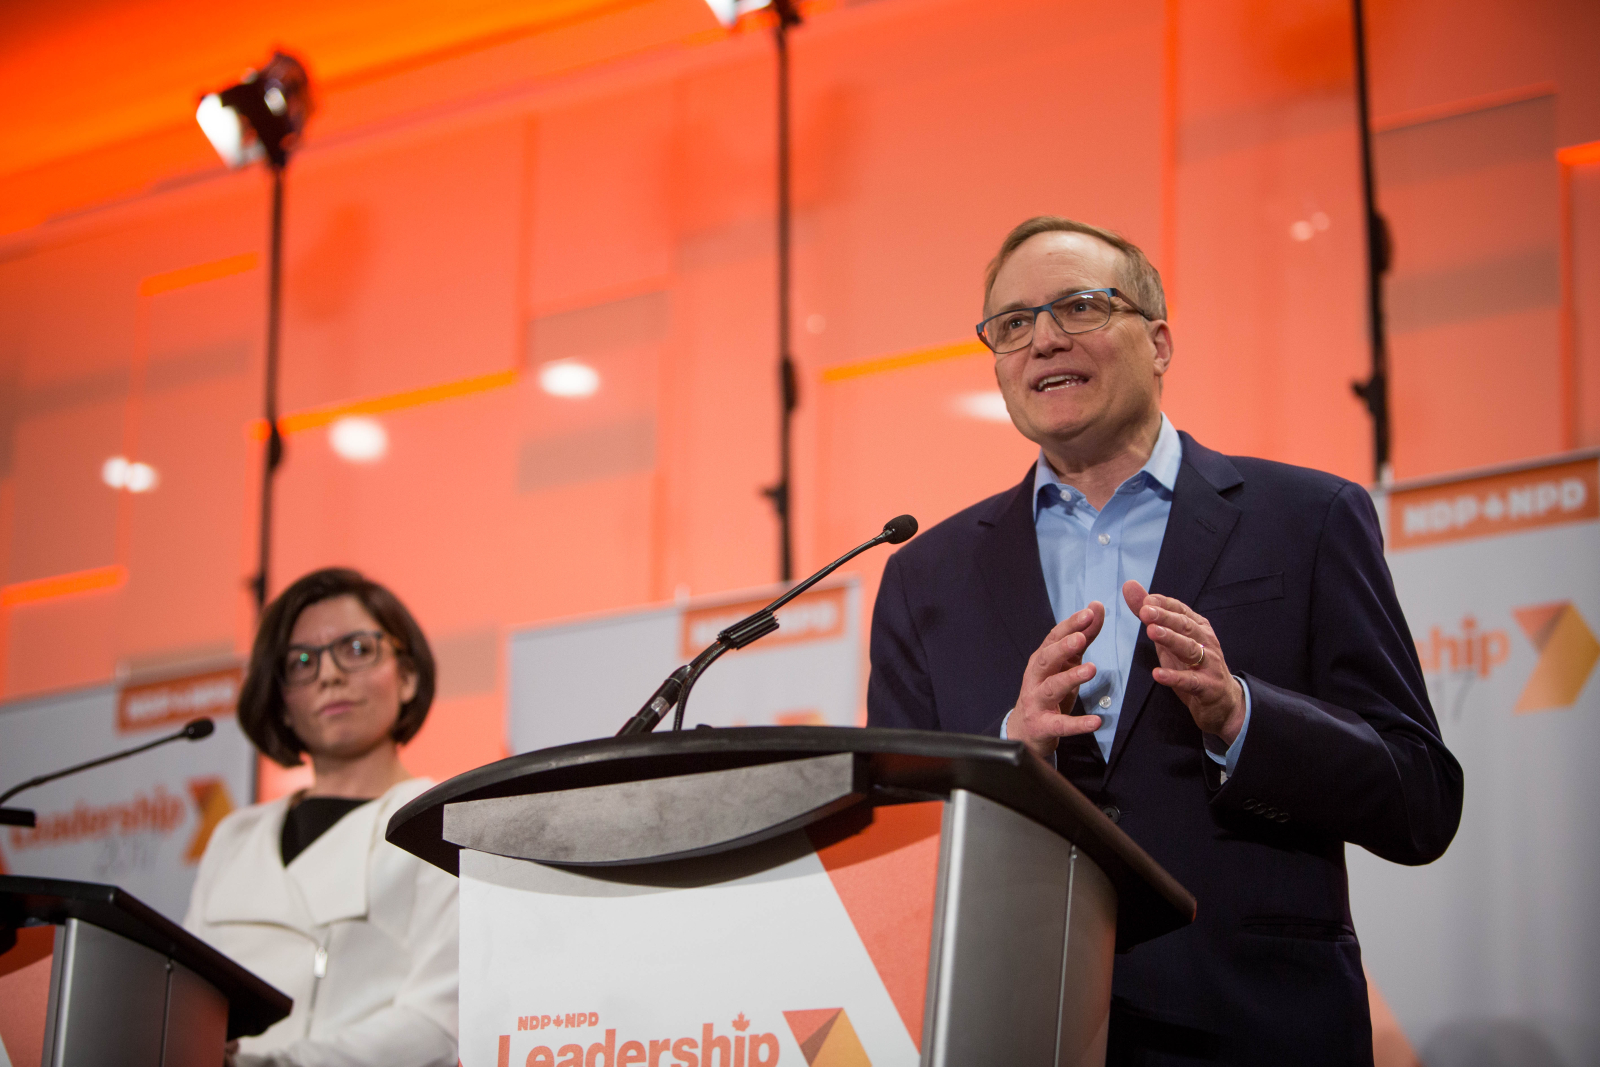 Peter Julian, the NDP MP for Burnaby-New Westminster, is one of four candidates running for the party's leadership. Photo by Alex Tétreault.